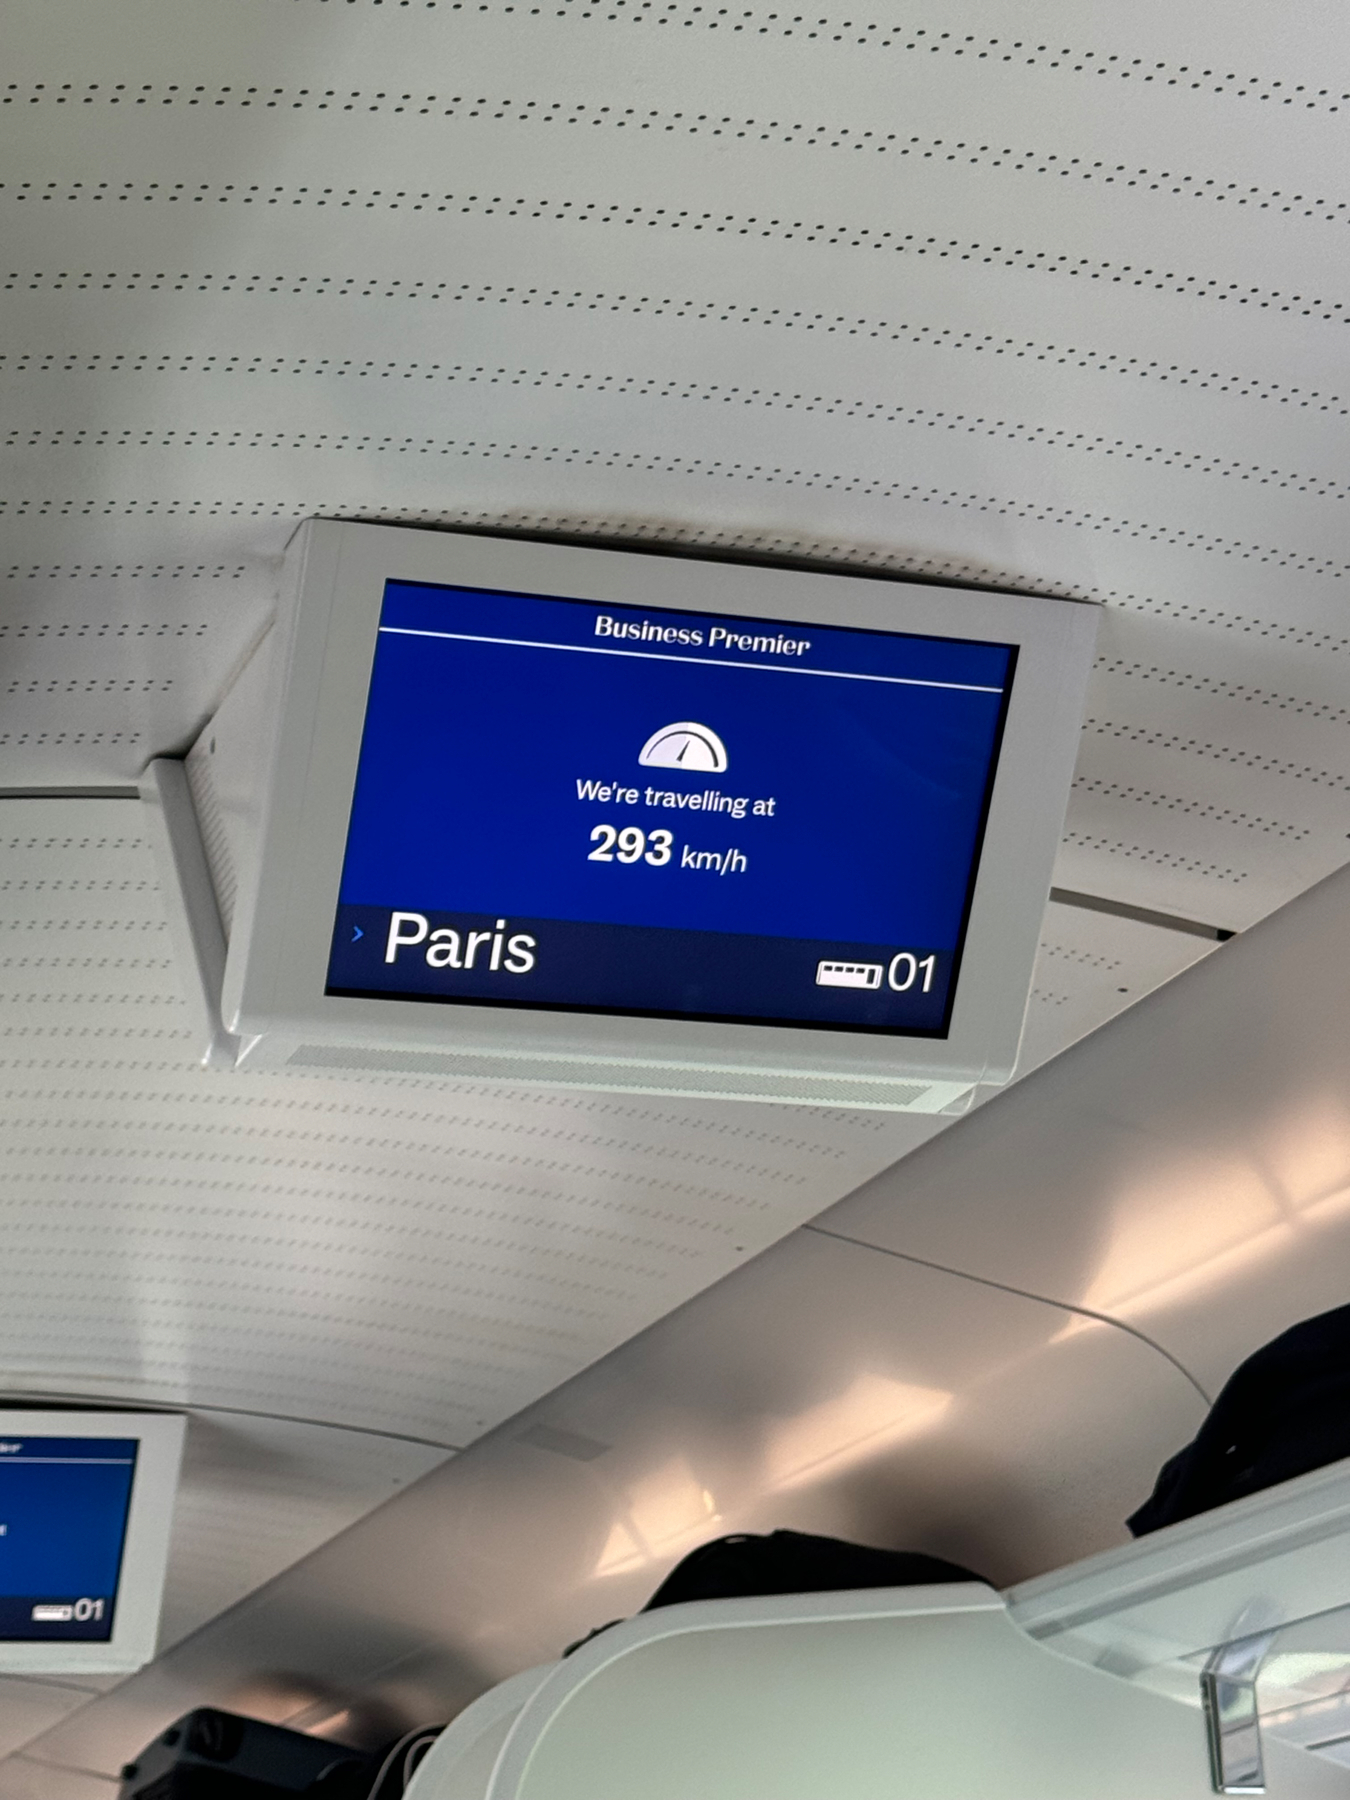 A digital display inside a train showing the speed of 293 km/h and the destination “Paris” under the label “Business Premier.